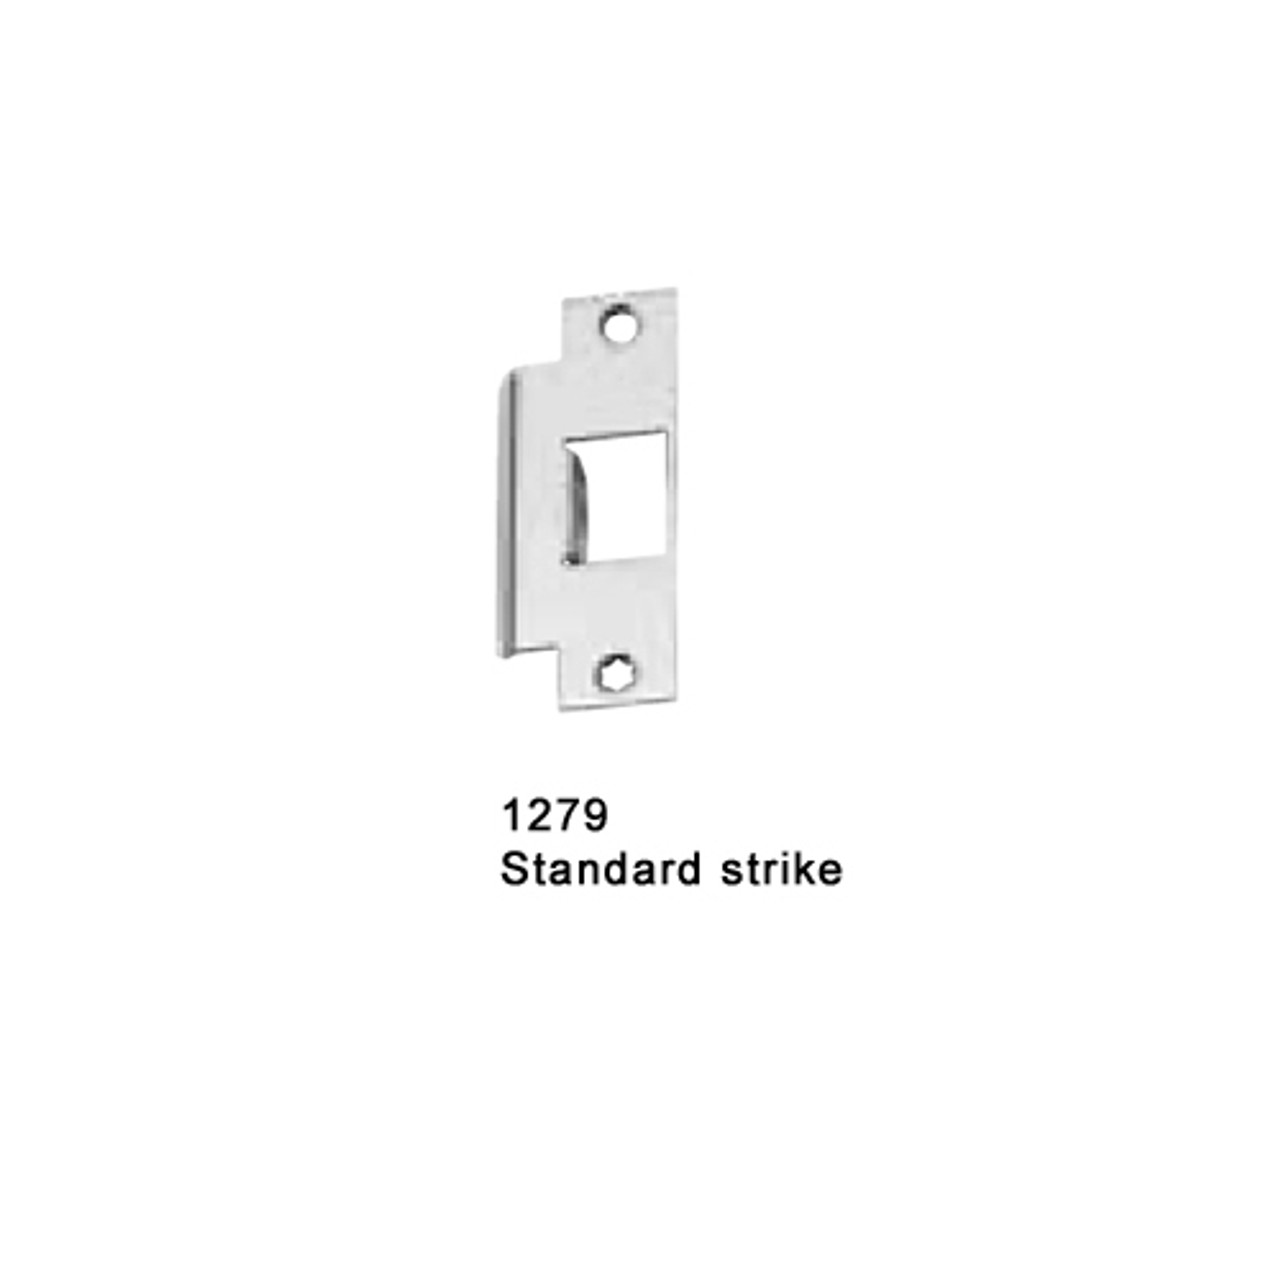 F-25-M-TP-US10-4-RHR Falcon 25 Series Fire Rated Mortise Lock Devices with 512TP Thumbpiece Trim in Satin Bronze